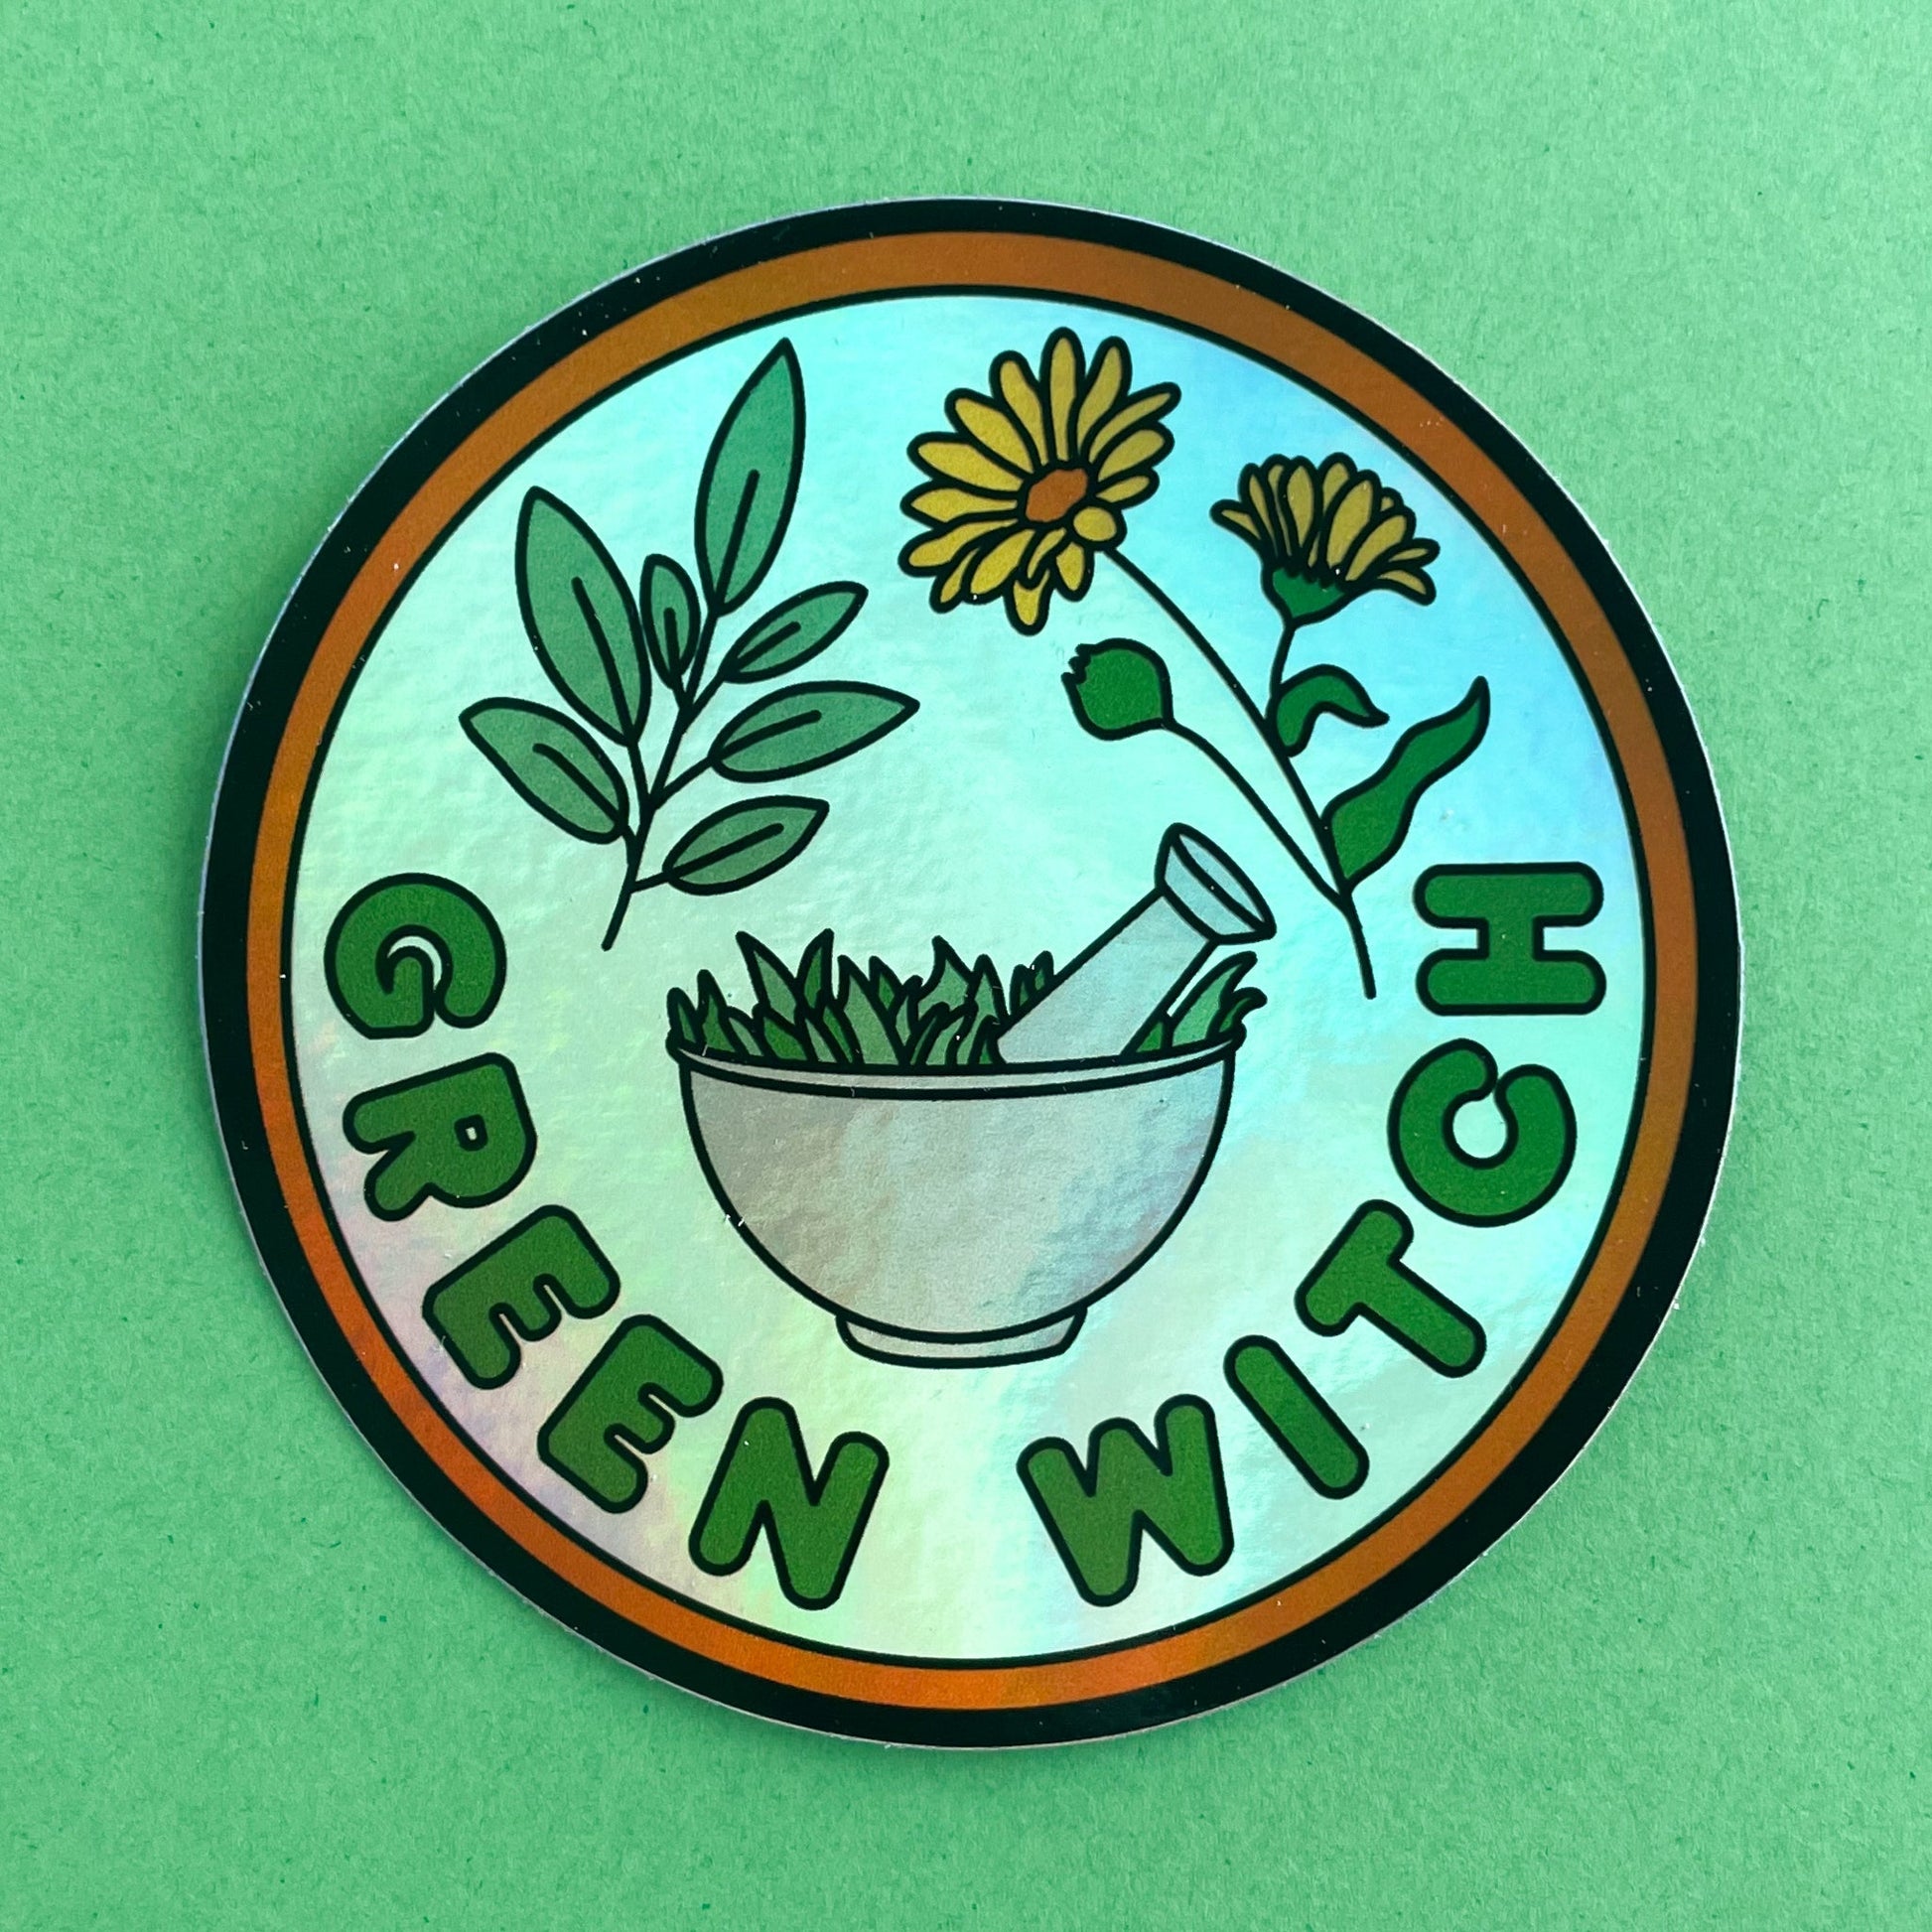 A circular holographic sticker that has an orange border and the words "Green Witch" on it. Sage leaves, calendula flowers, and a mortar and pestle are depicted on it. The sticker is on a green background.